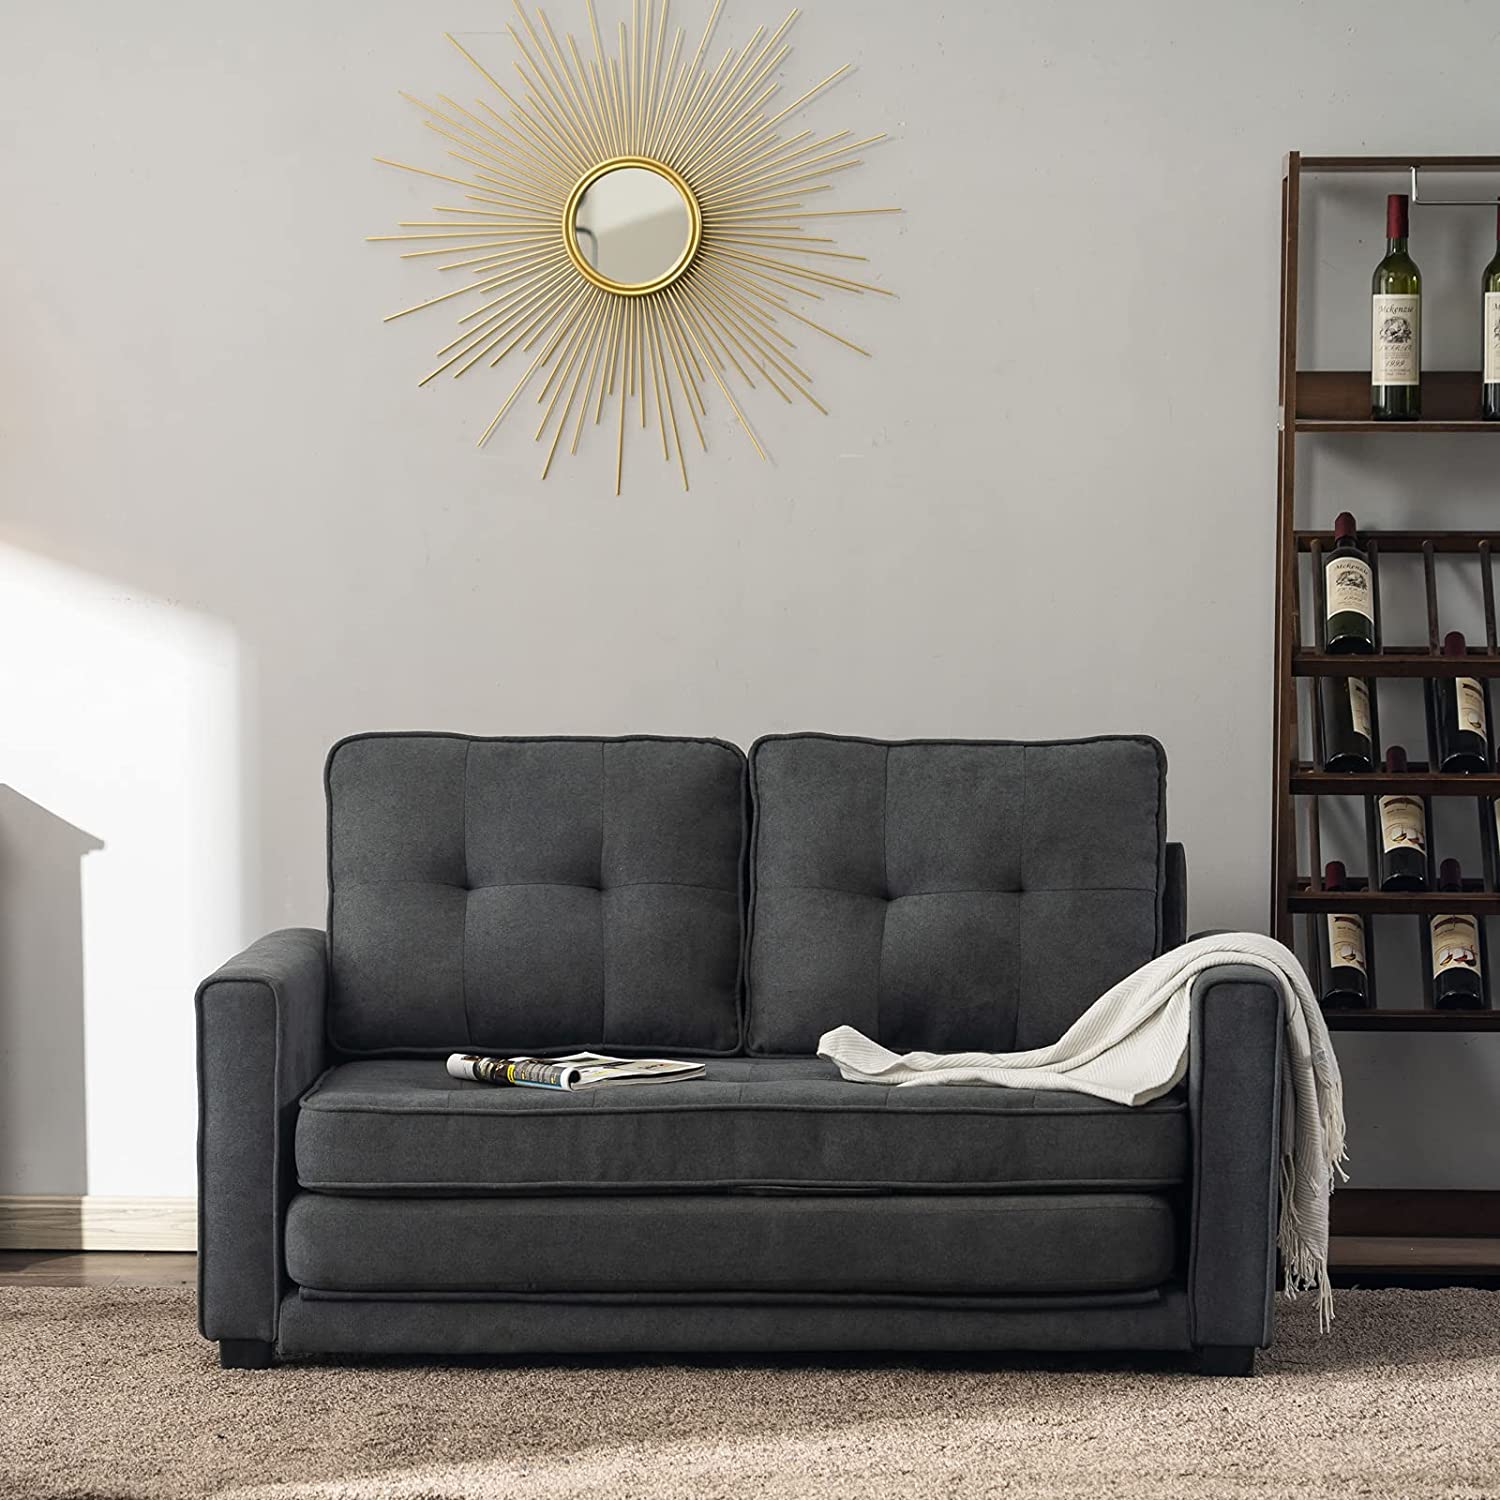 https://www.etonline.com/sites/default/files/images/2021-07/Modern%20and%20Simple%20Nordic%20Style%20Double%20Sofa%20Bed.jpg